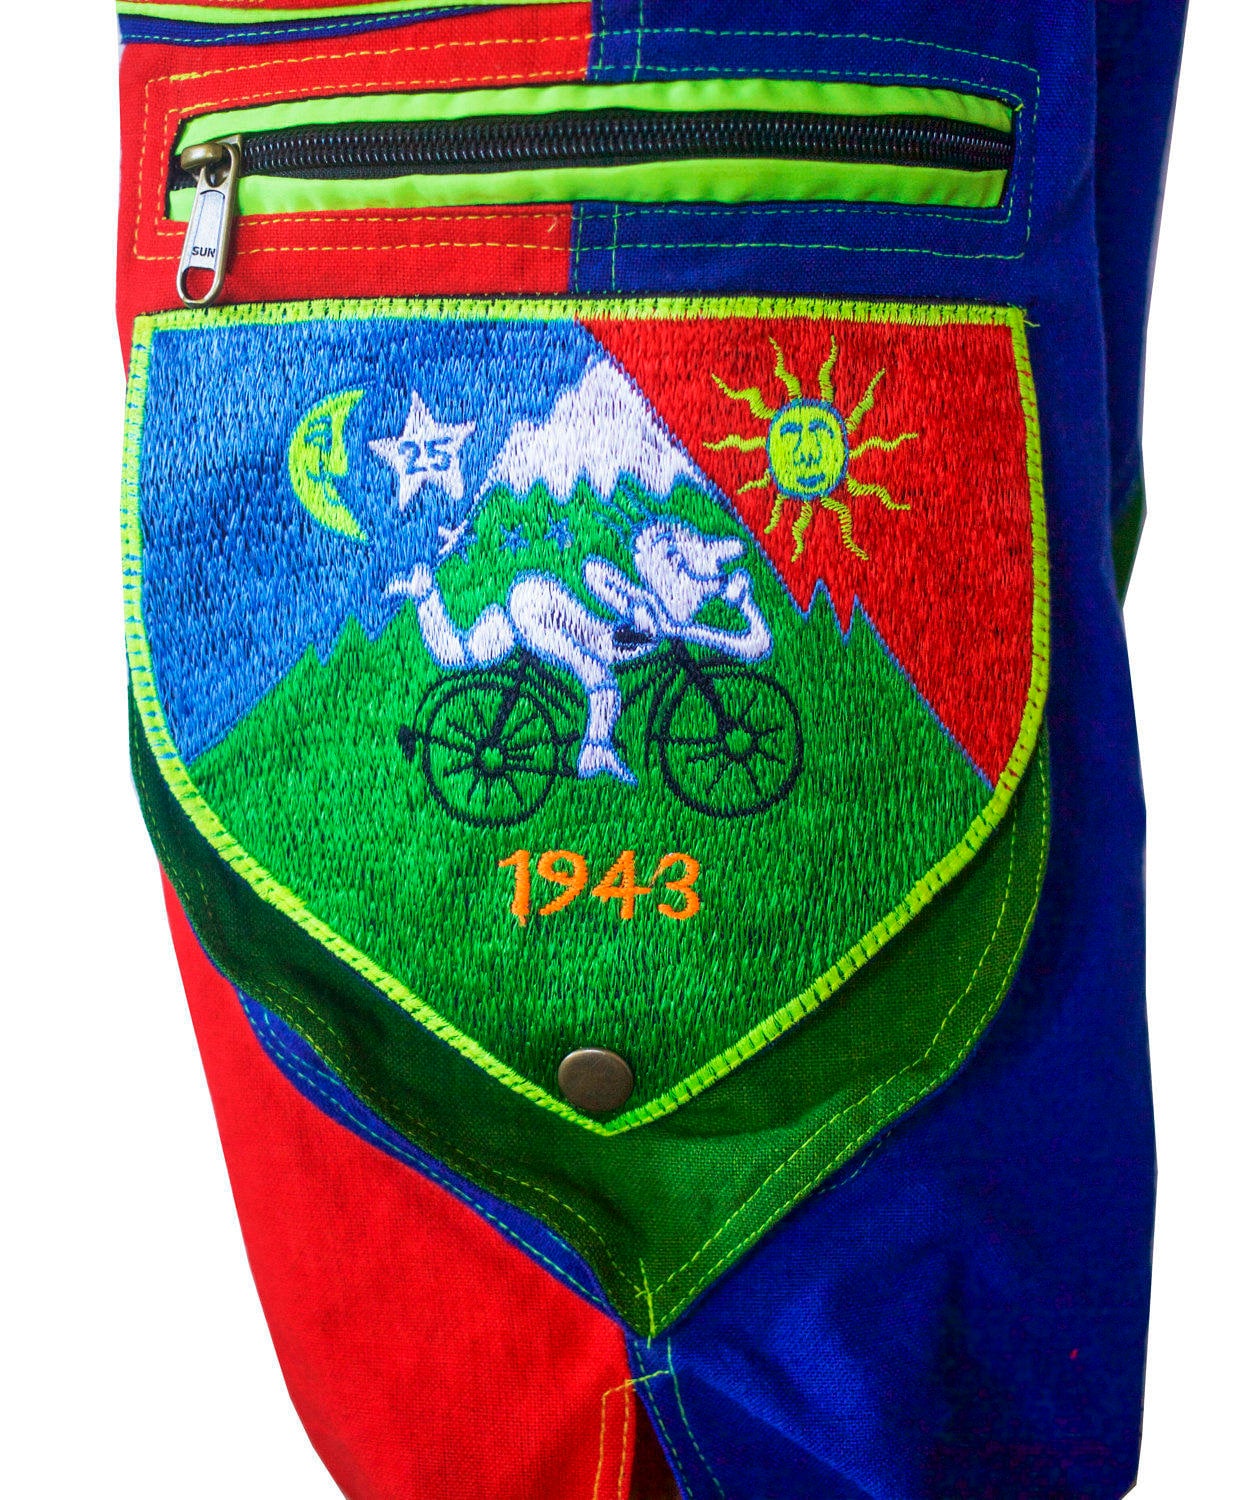 Bicycle Day LSD Pants - 9 pockets with 4 zip locks - cult Albert Hofmann psychedelic vintage - any size available handmade after order